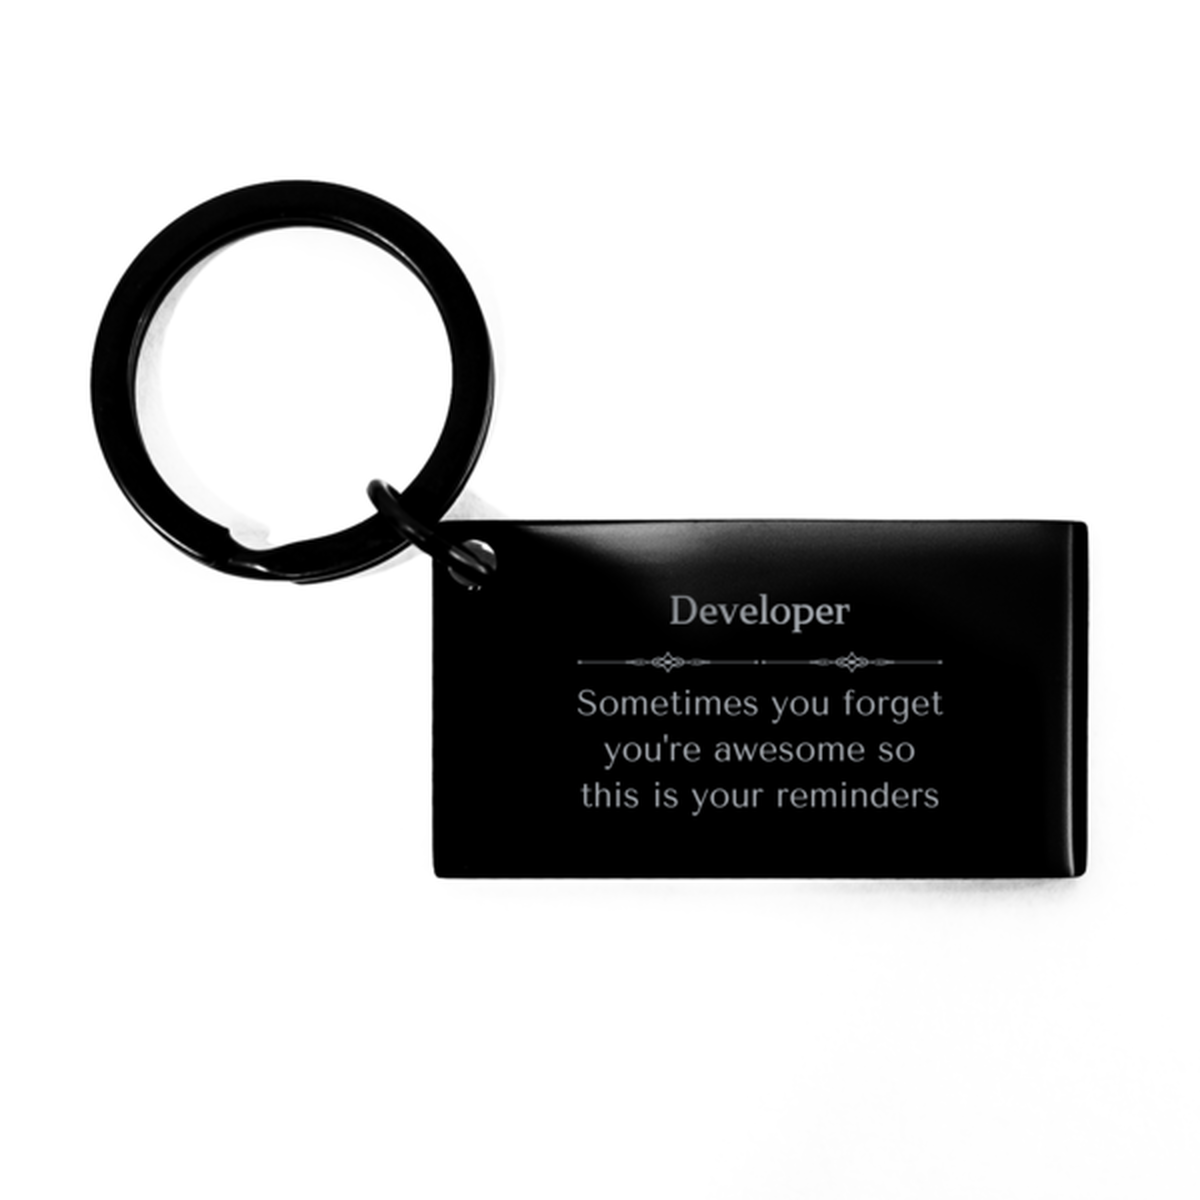 Sentimental Developer Keychain, Guide Sometimes you forget you're awesome so this is your reminders, Graduation Christmas Birthday Gifts for Developer, Men, Women, Coworkers